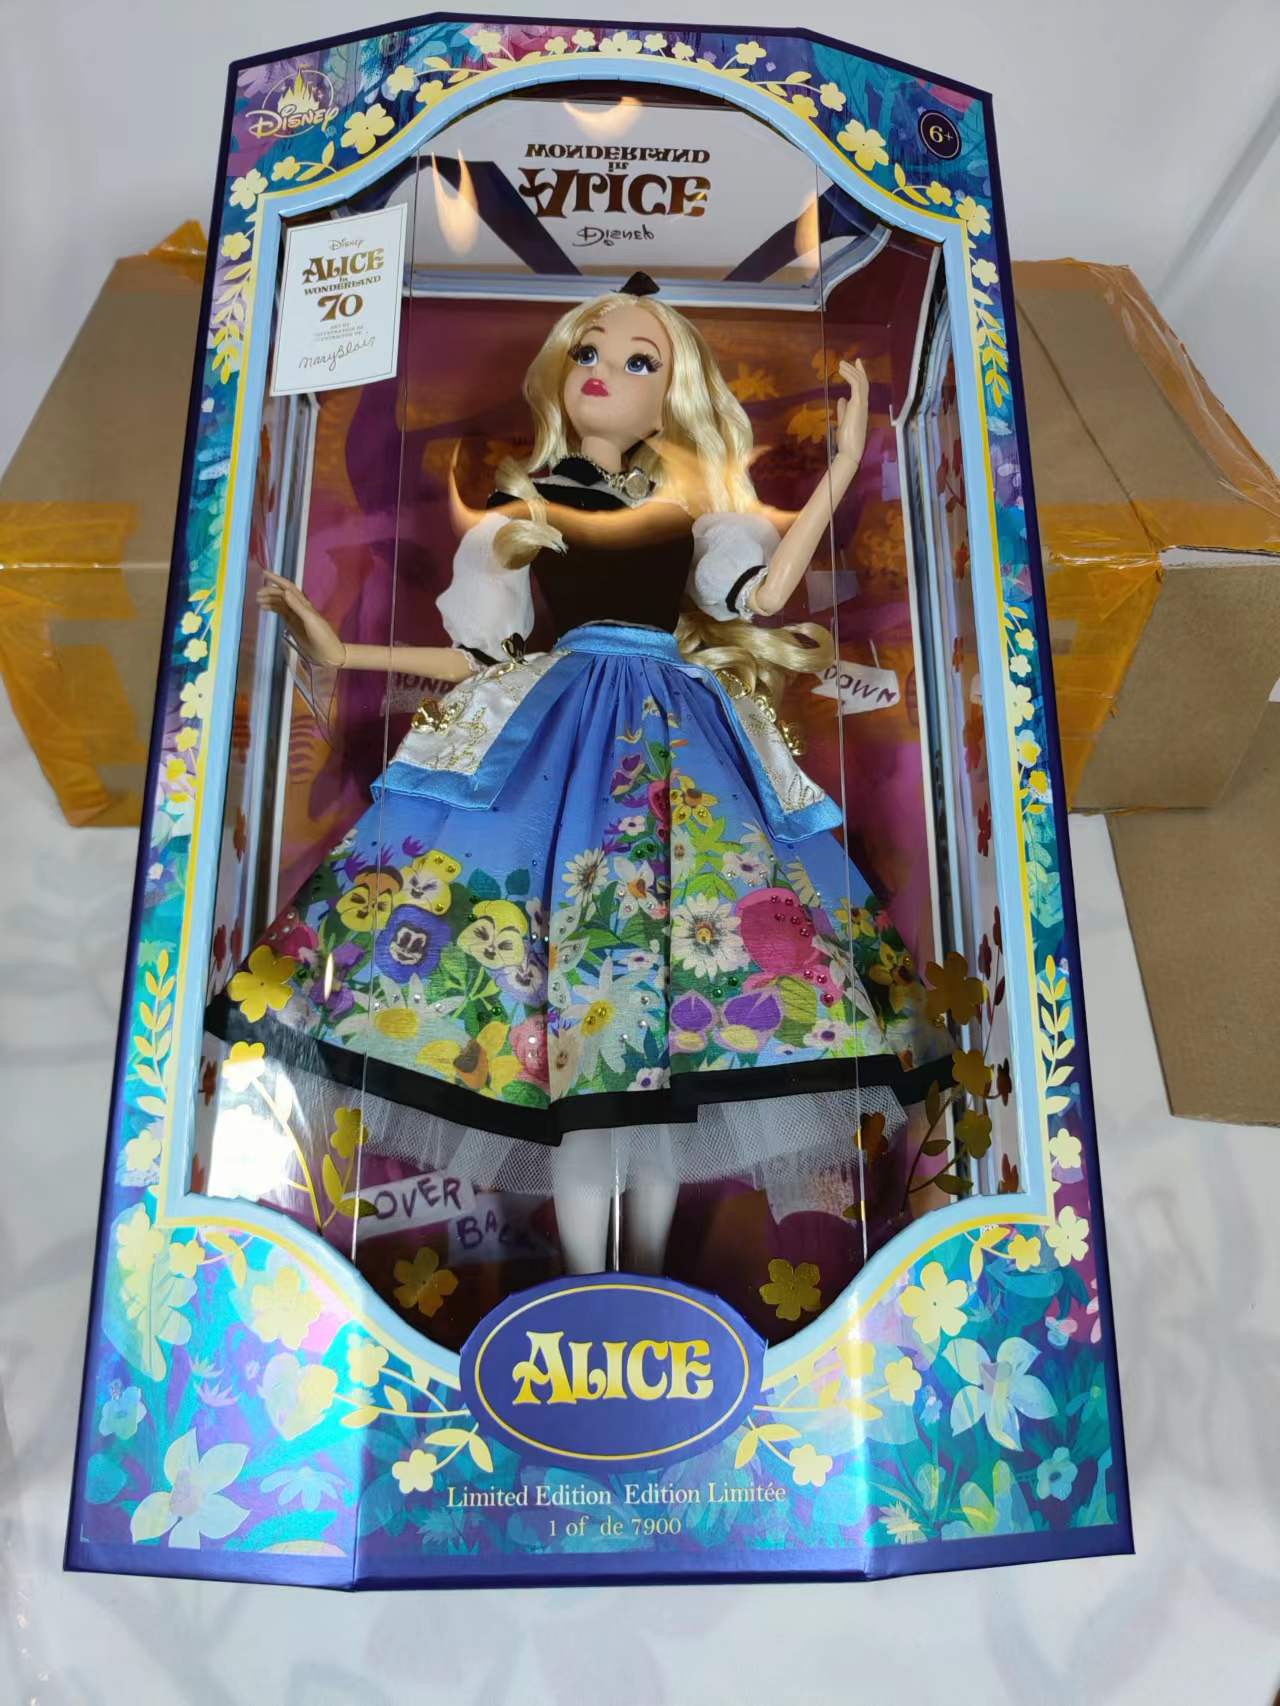 Disney Alice in Wonderland Doll Mary Blair Limited Edition 70th Anniversary